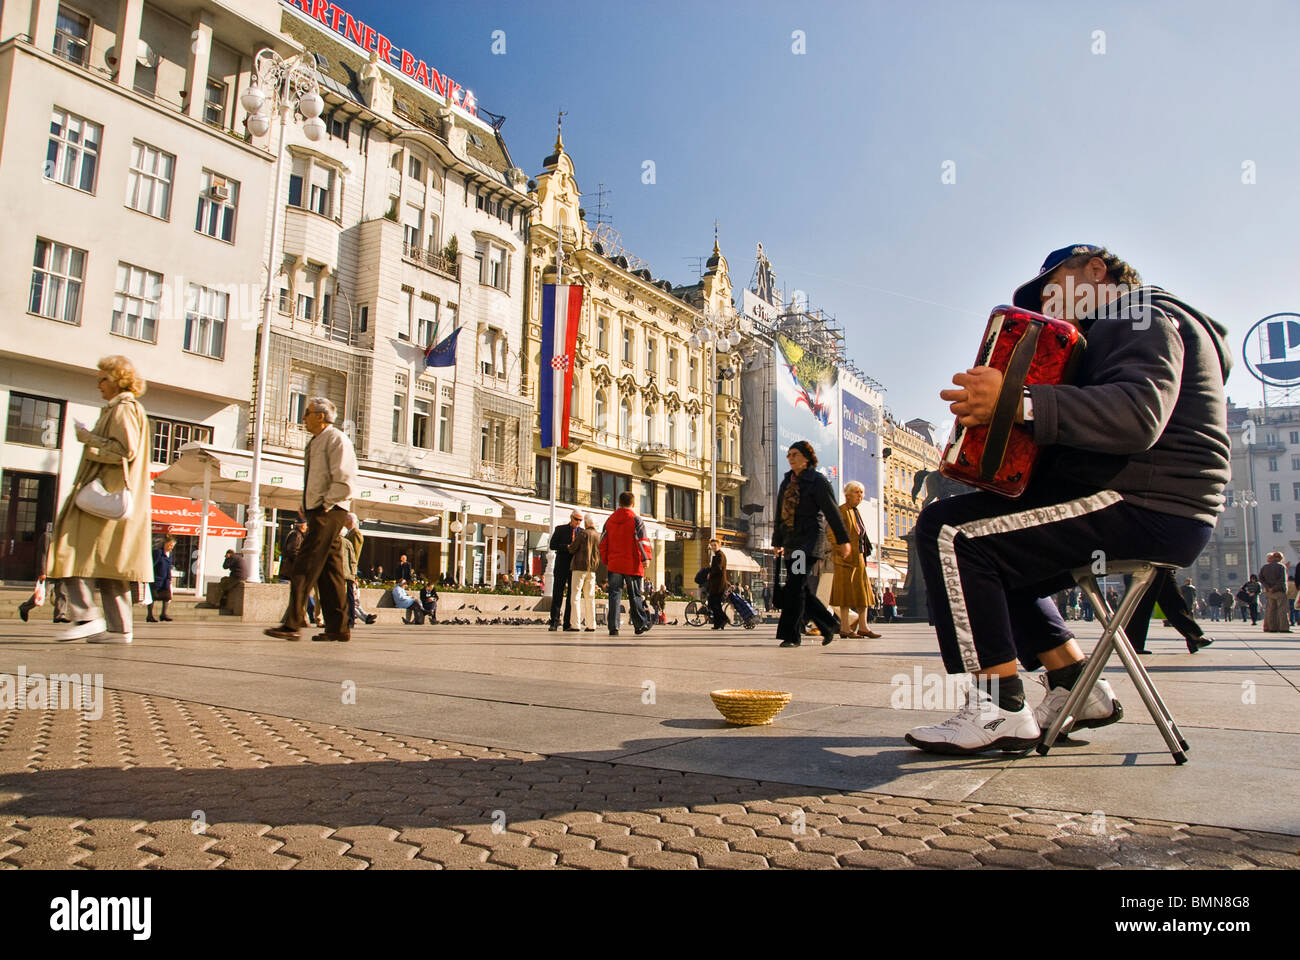 Man playing accordion for money in the streets of Zagreb, Croatia, Europe. Stock Photo